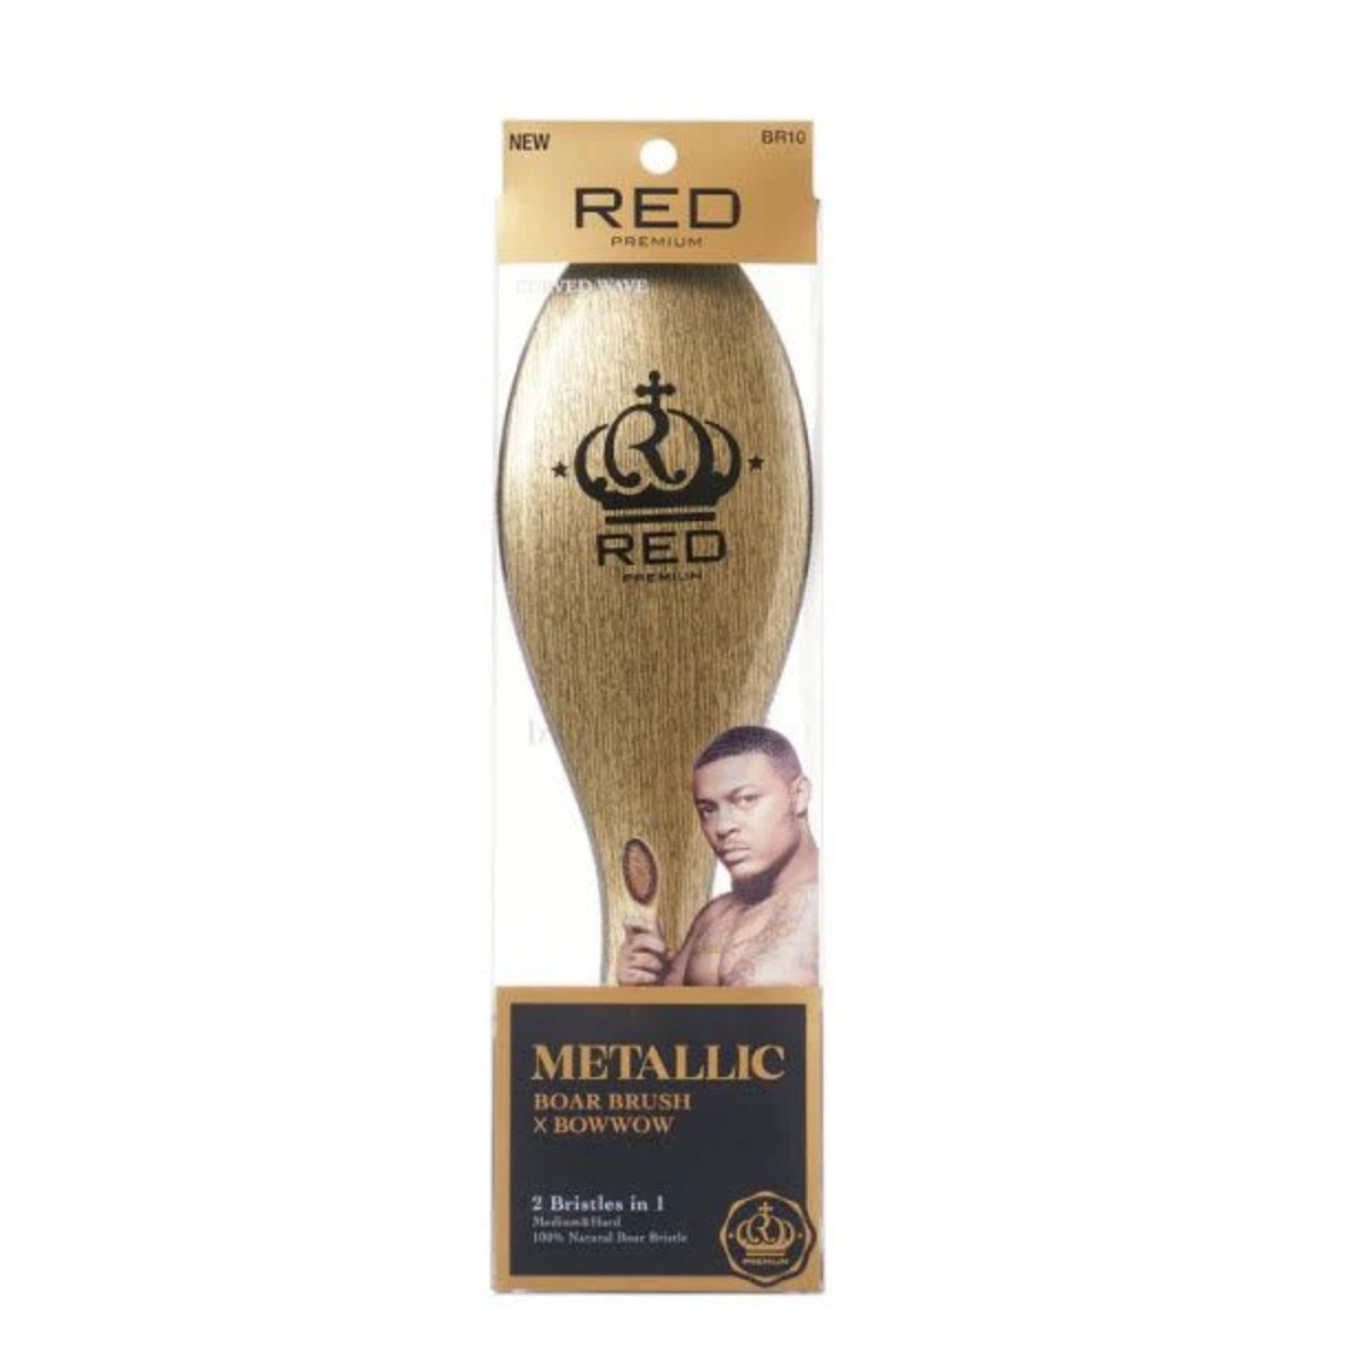 RED Premium Metallic Boar Brush X Bow Wow - Curved Wave